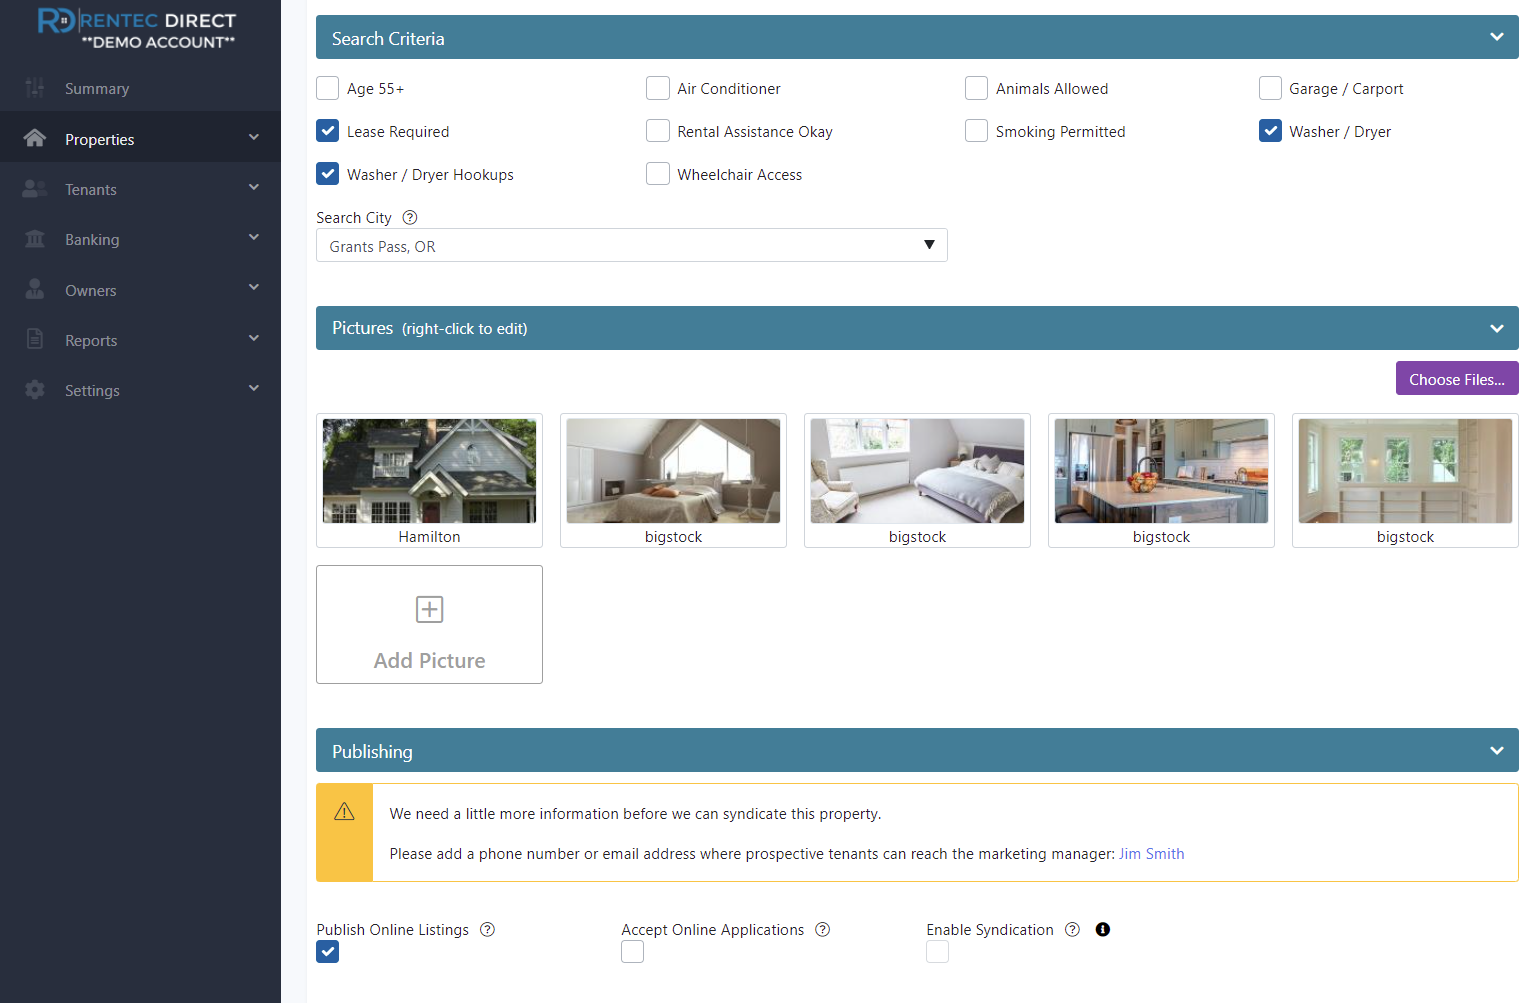 Market vacancies with Rentec Direct to fill properties quickly. Instantly publish listings to the top rental listing sites to the industry's biggest rental listing syndication network. Collect tenant applications, track leads, screen tenants, & more.